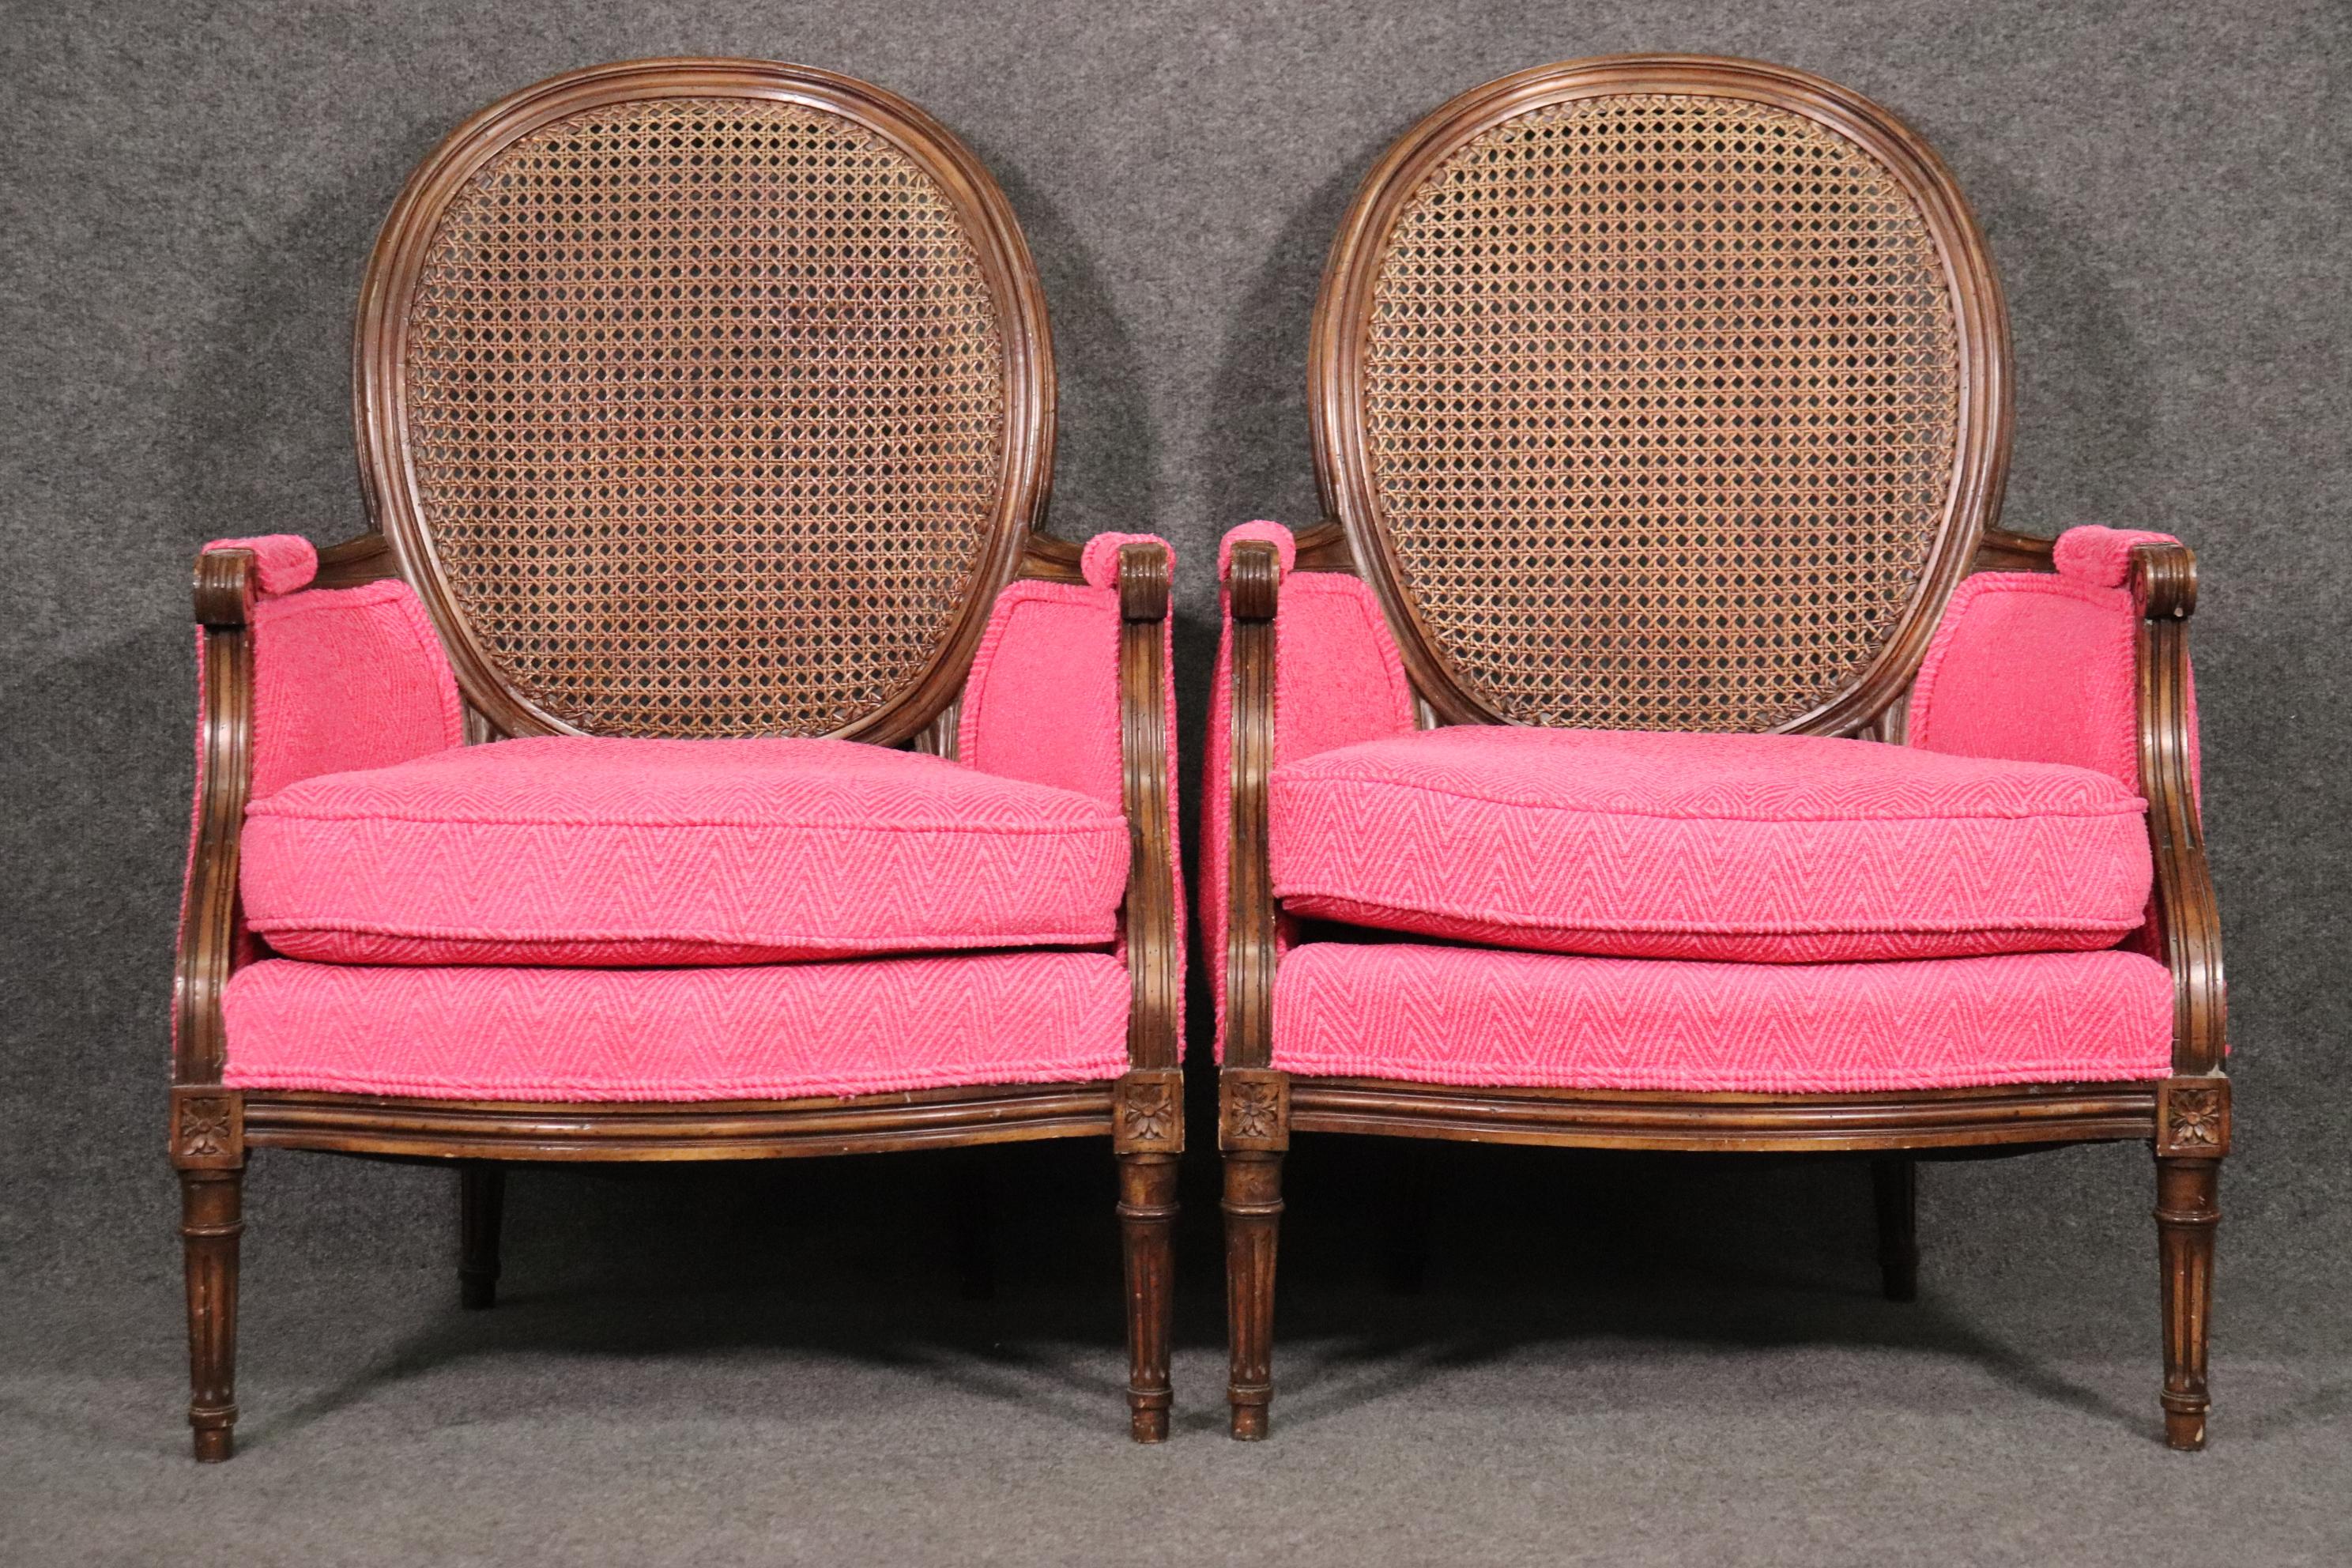 This is a beautiful and unique pair of bergere chairs in walnut with cane backs. The chairs measure 37 tall x 26 wide x 26 deep x seat height of 18. They date to the 1960s era.